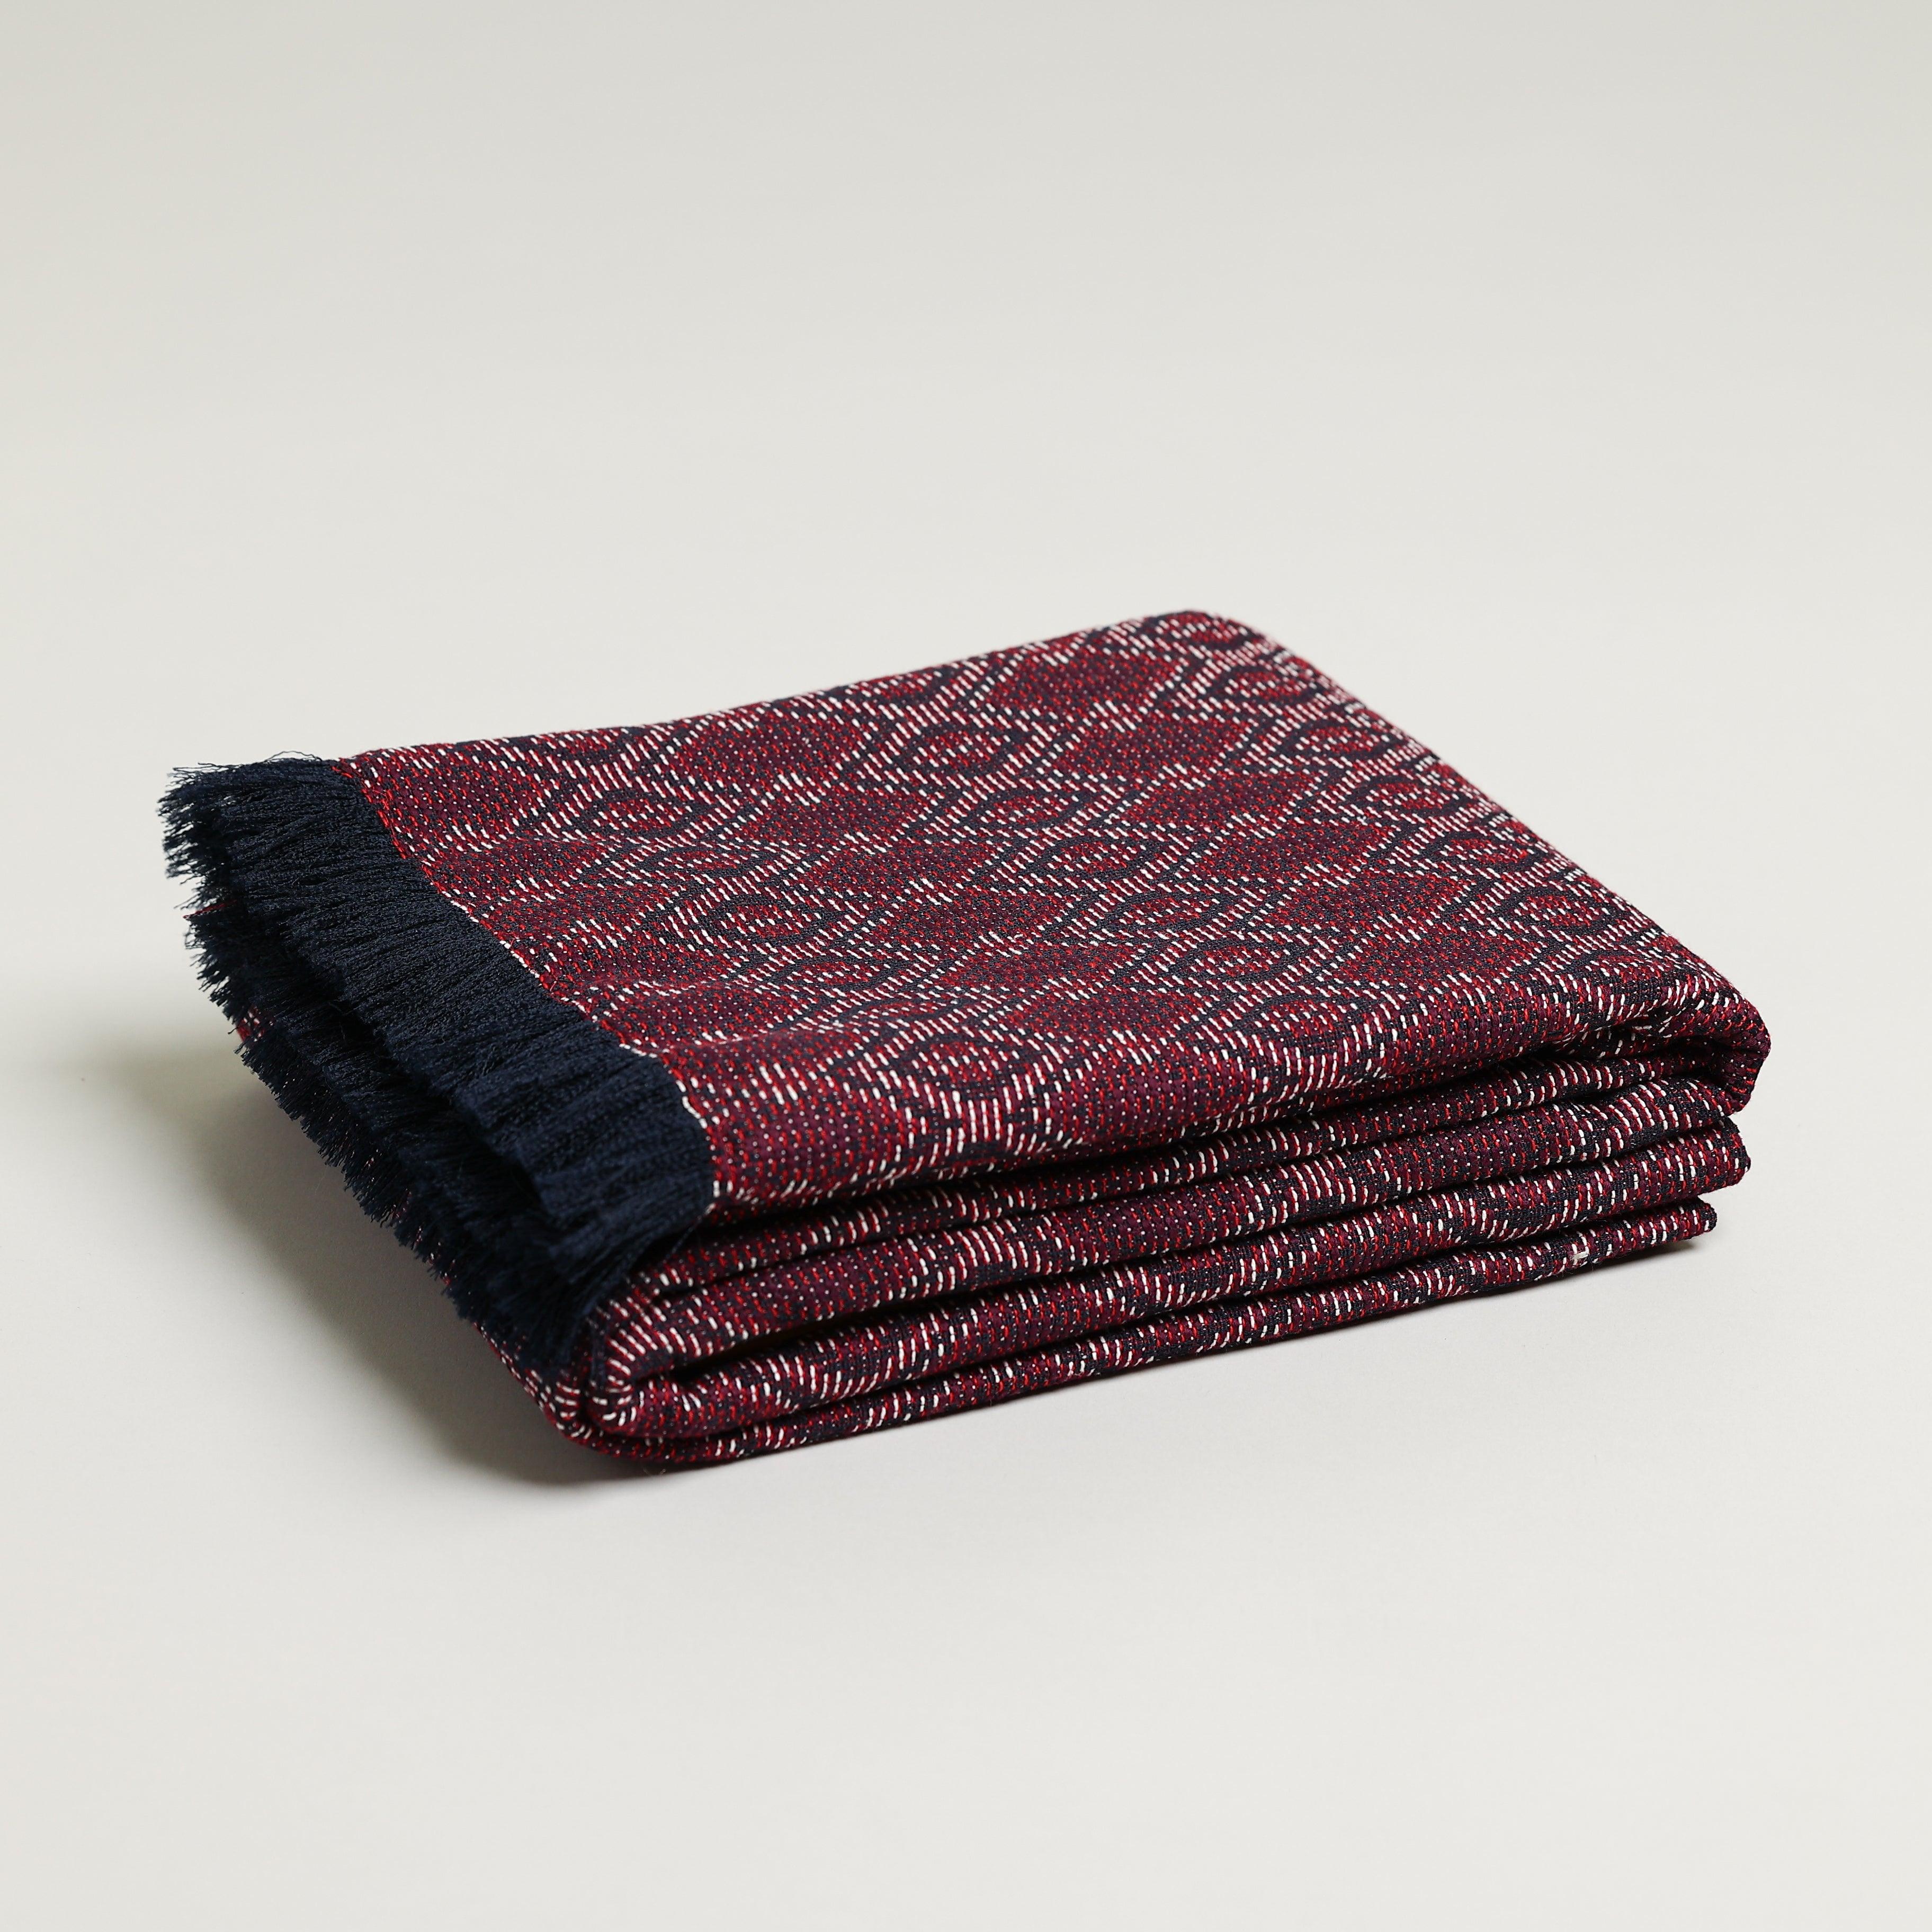 Maroon, navy, and white jacquard throw blanket 